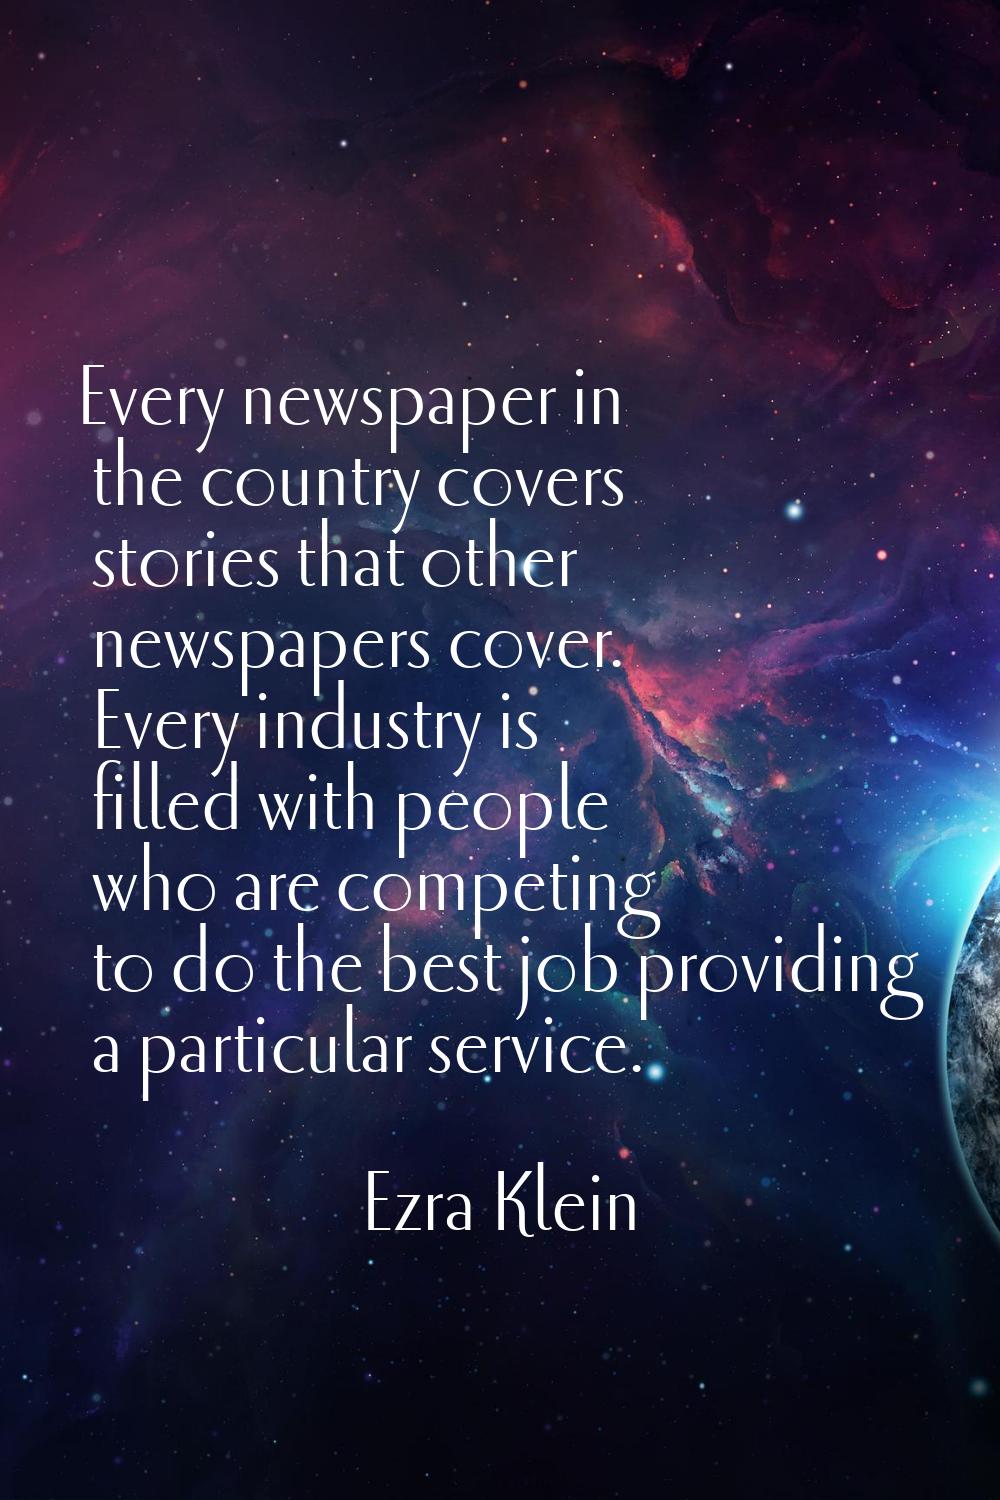 Every newspaper in the country covers stories that other newspapers cover. Every industry is filled